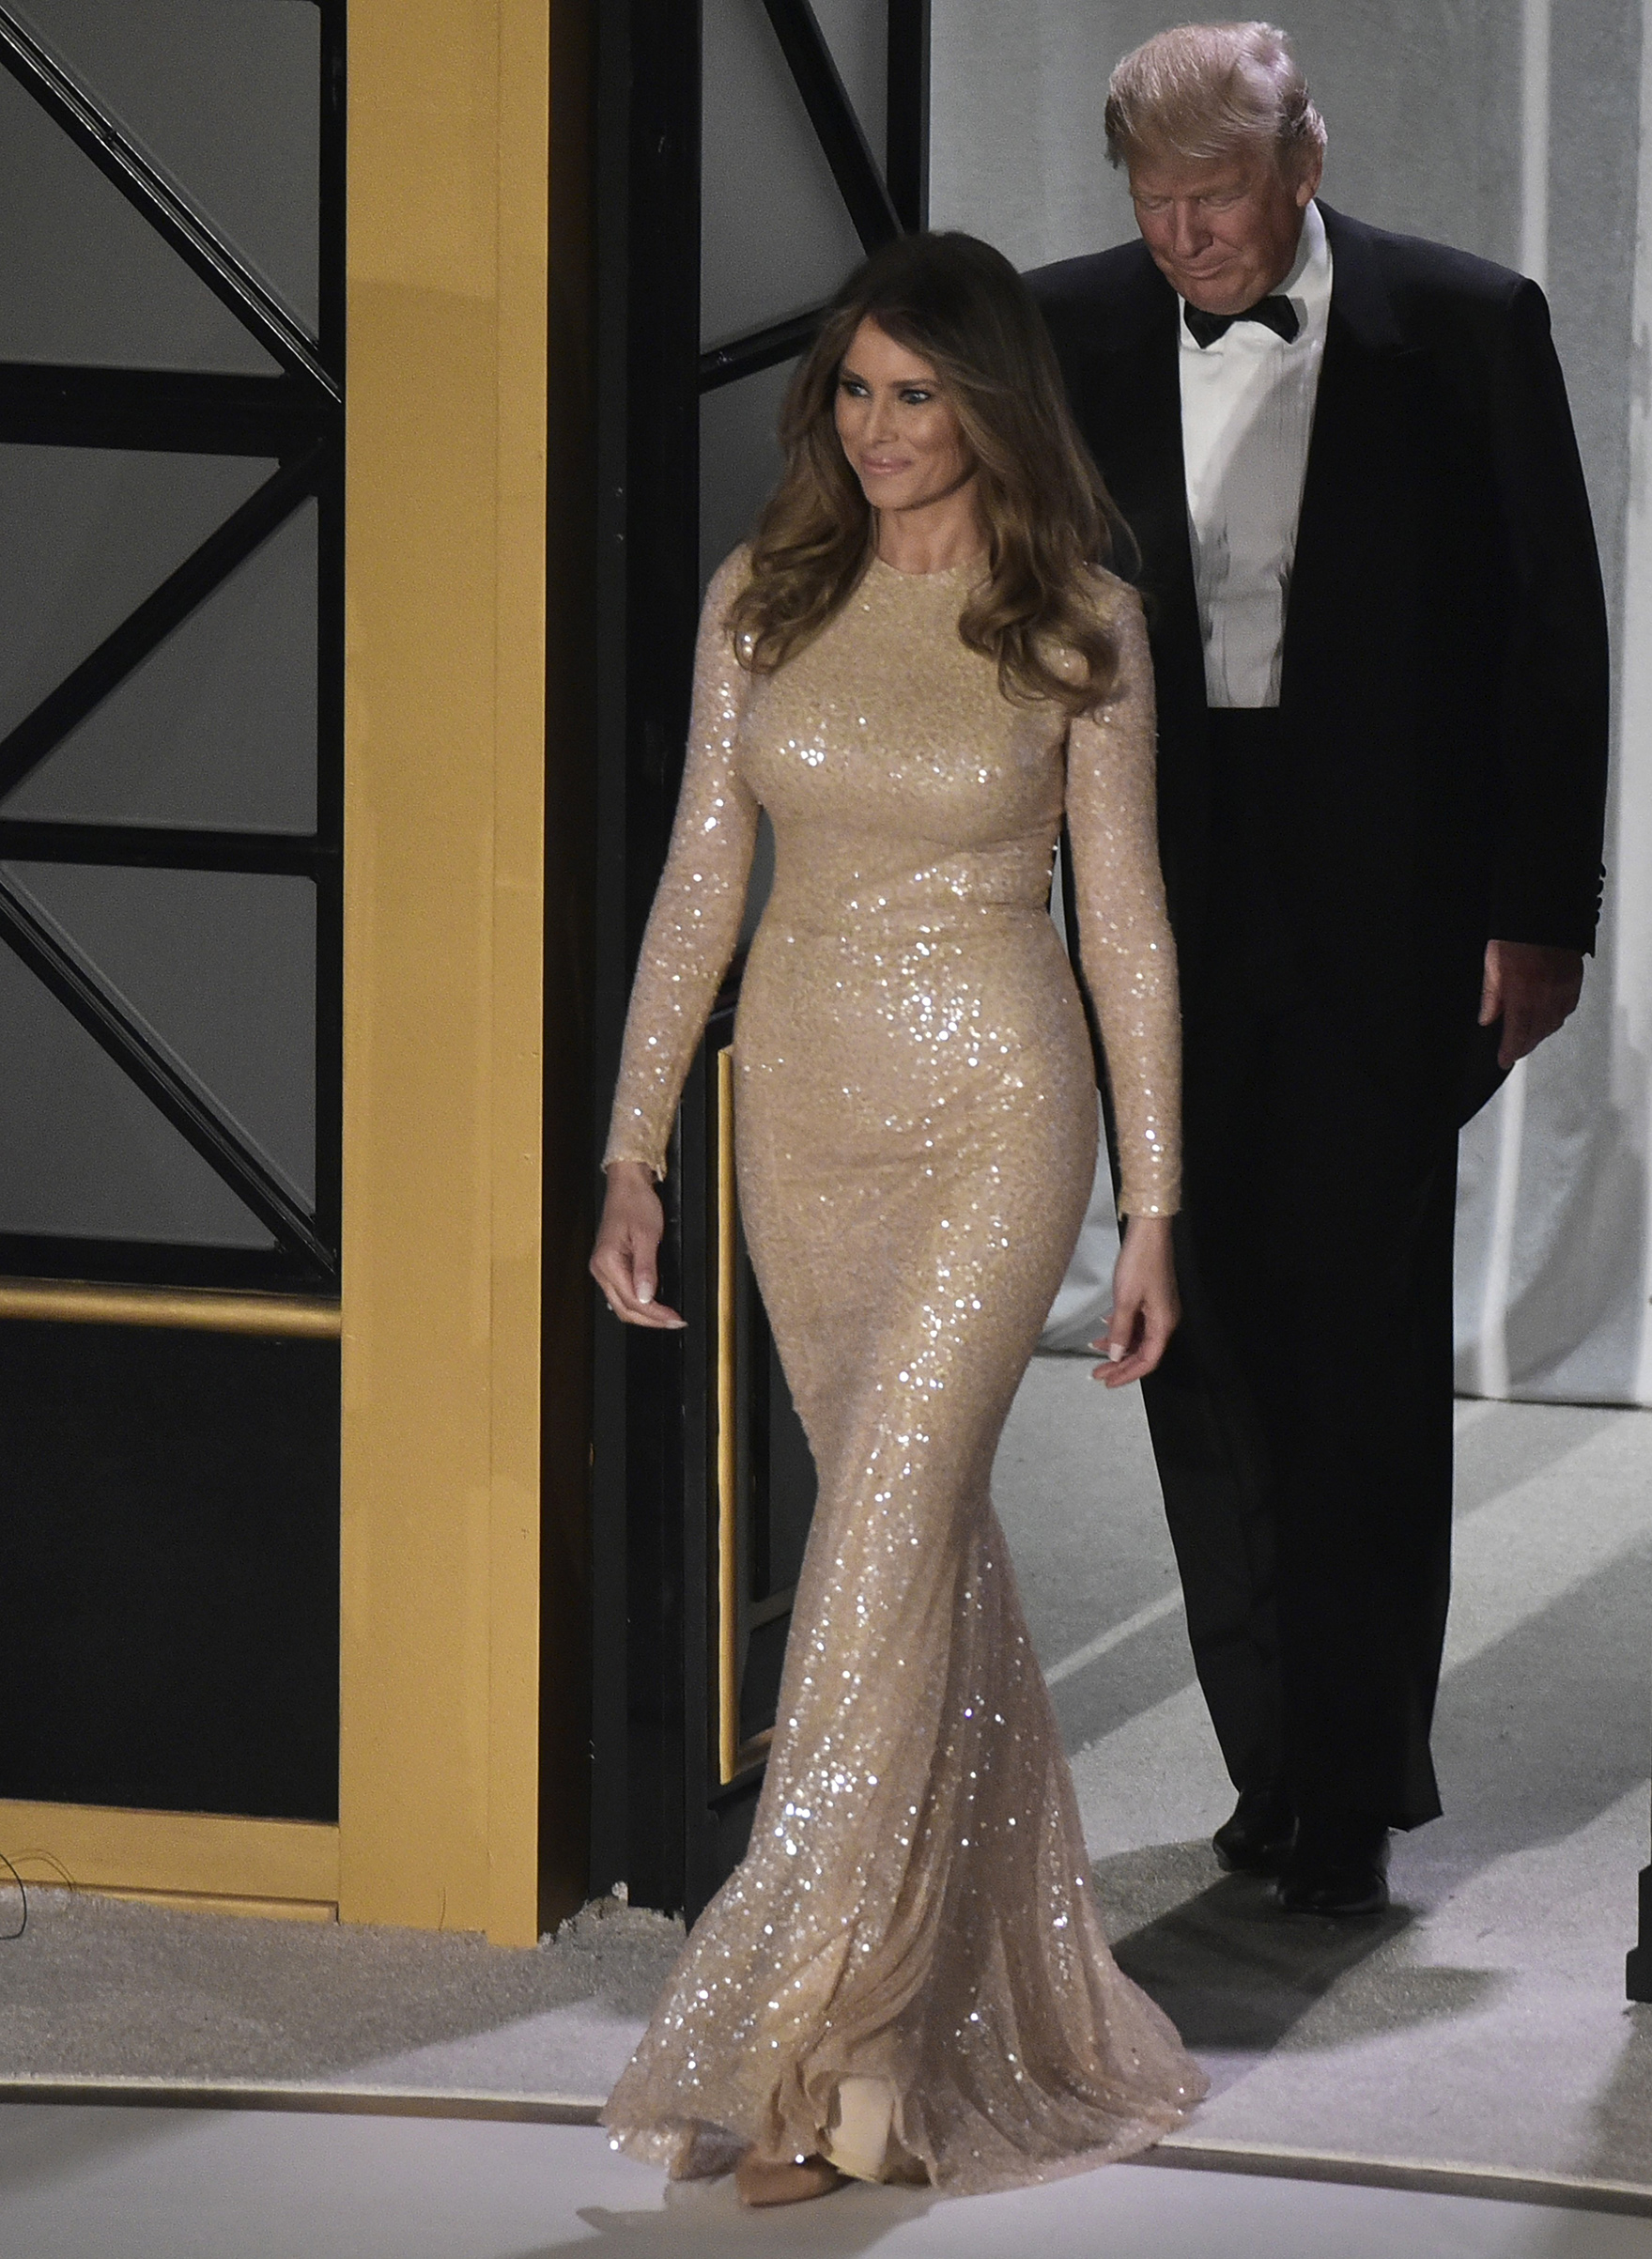 President-elect Donald Trump and wife Melania Trump wearing a Reem Acra embellished gown, arrive for a reception and dinner at Union Station in Washington, DC on Jan. 19, 2017.